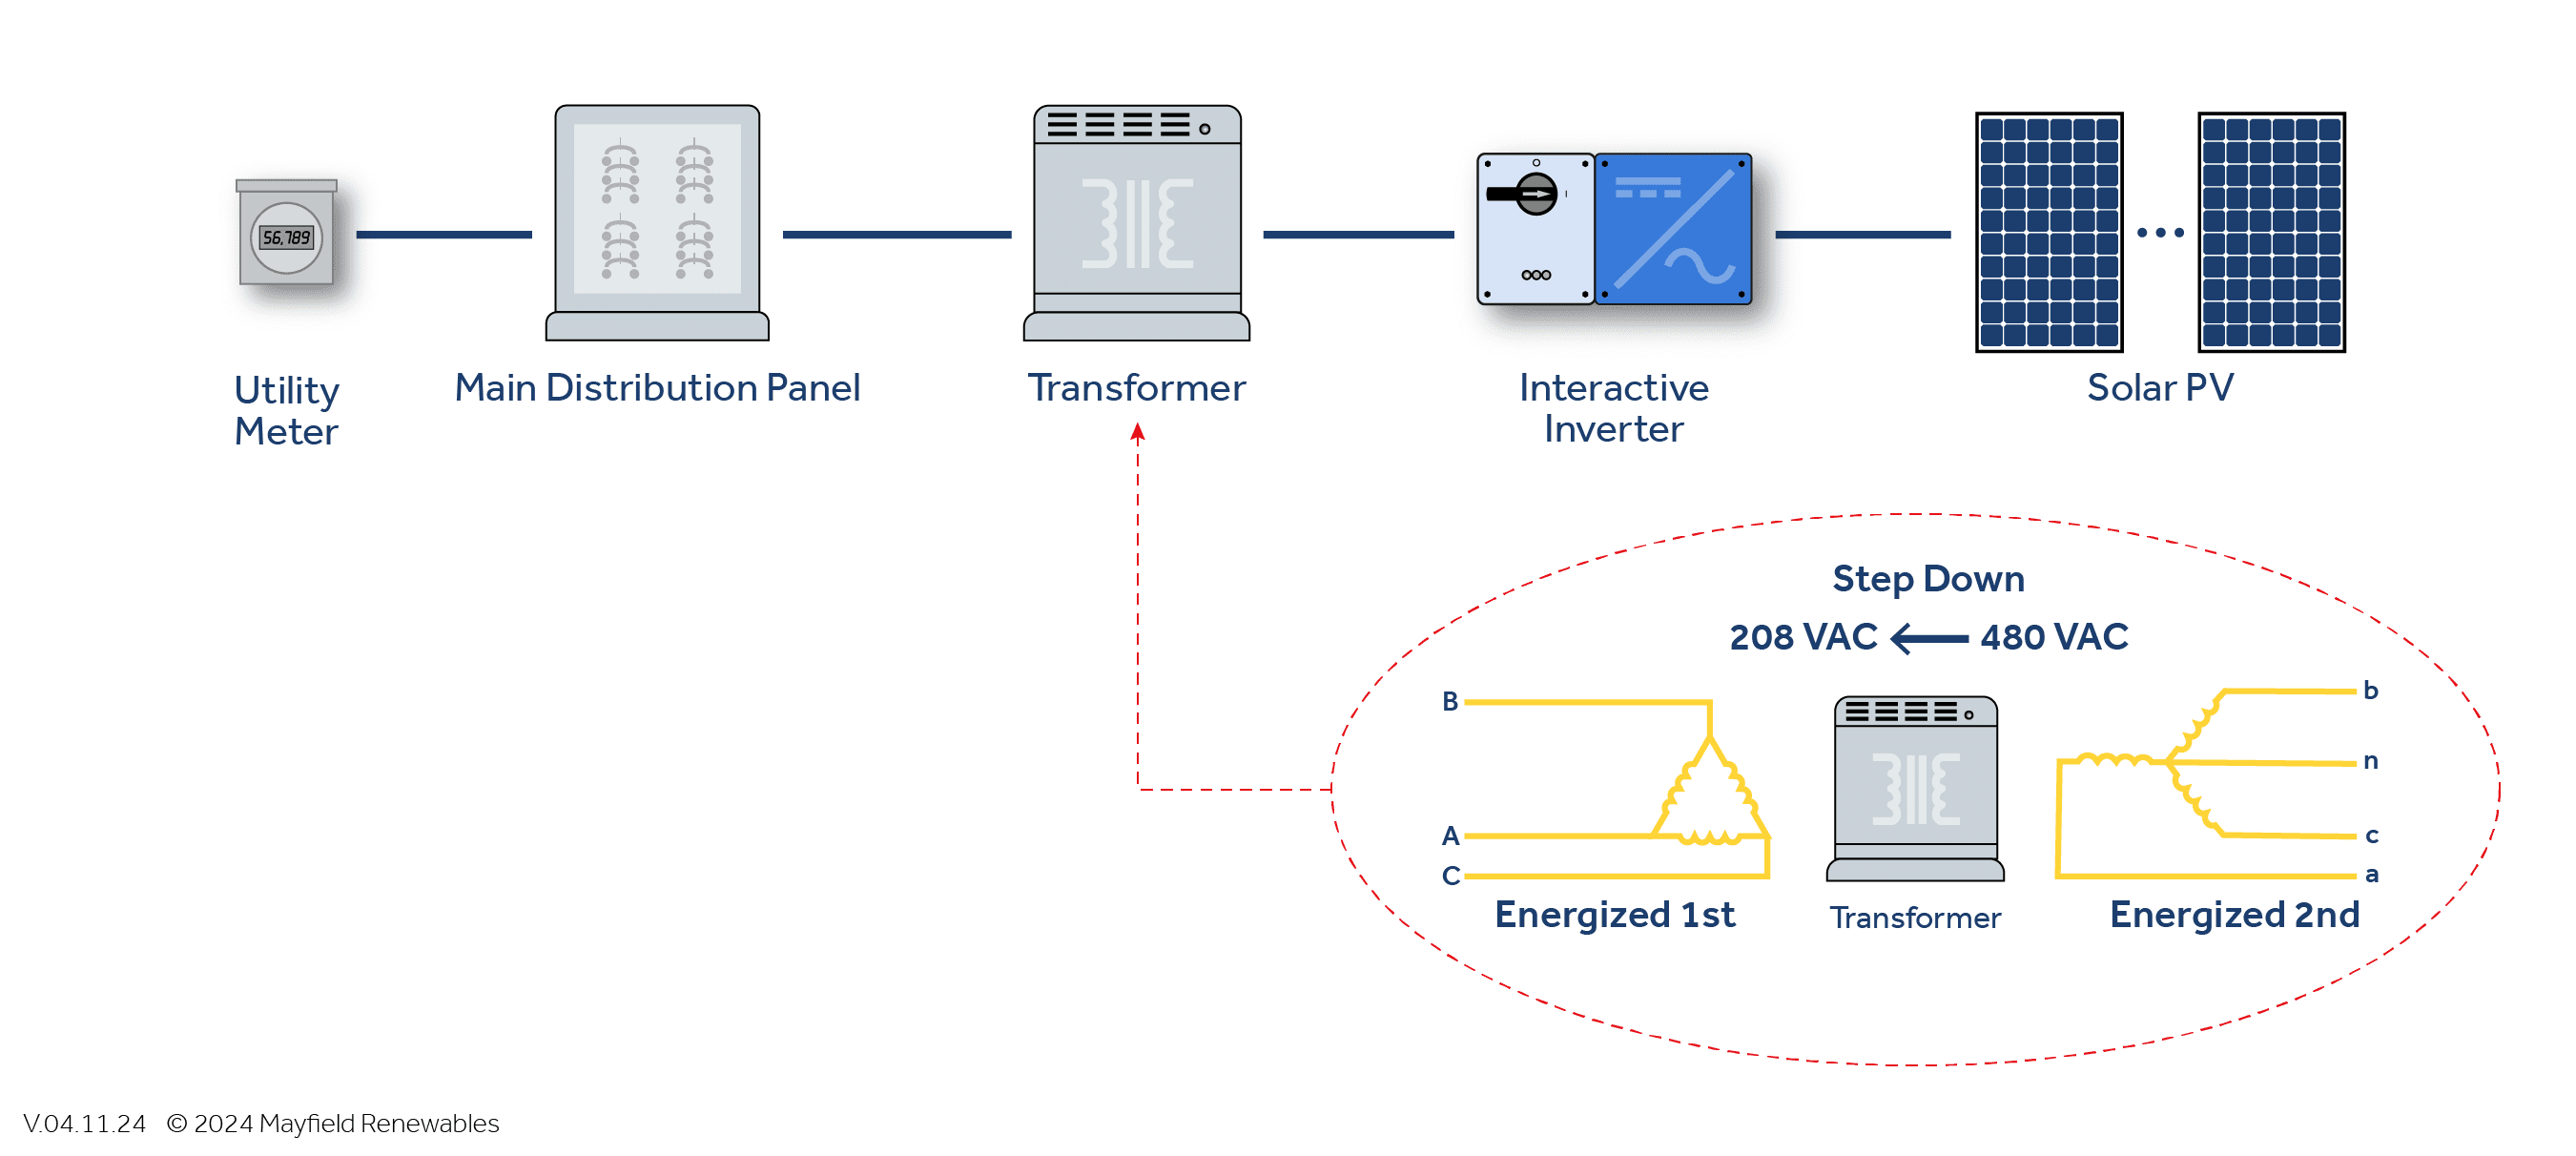 Diagram with labels and Delta and Wye callout